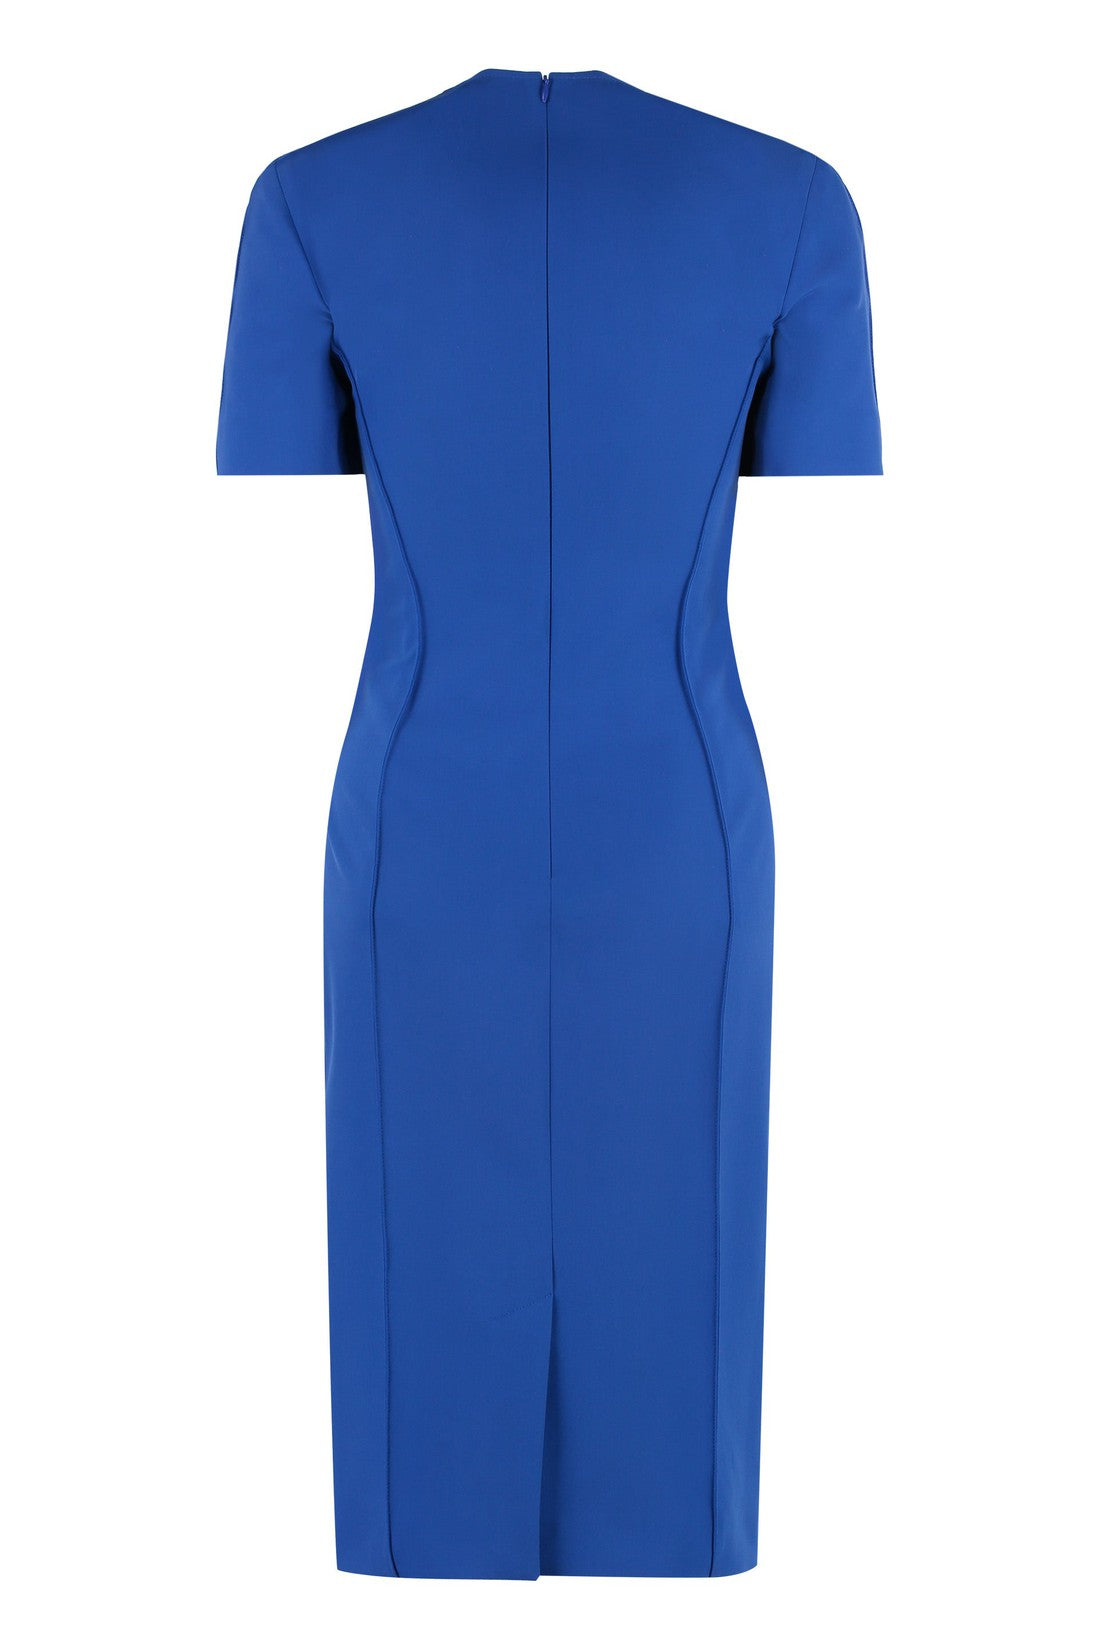 Boutique Moschino-OUTLET-SALE-Midi dress with flared hem-ARCHIVIST